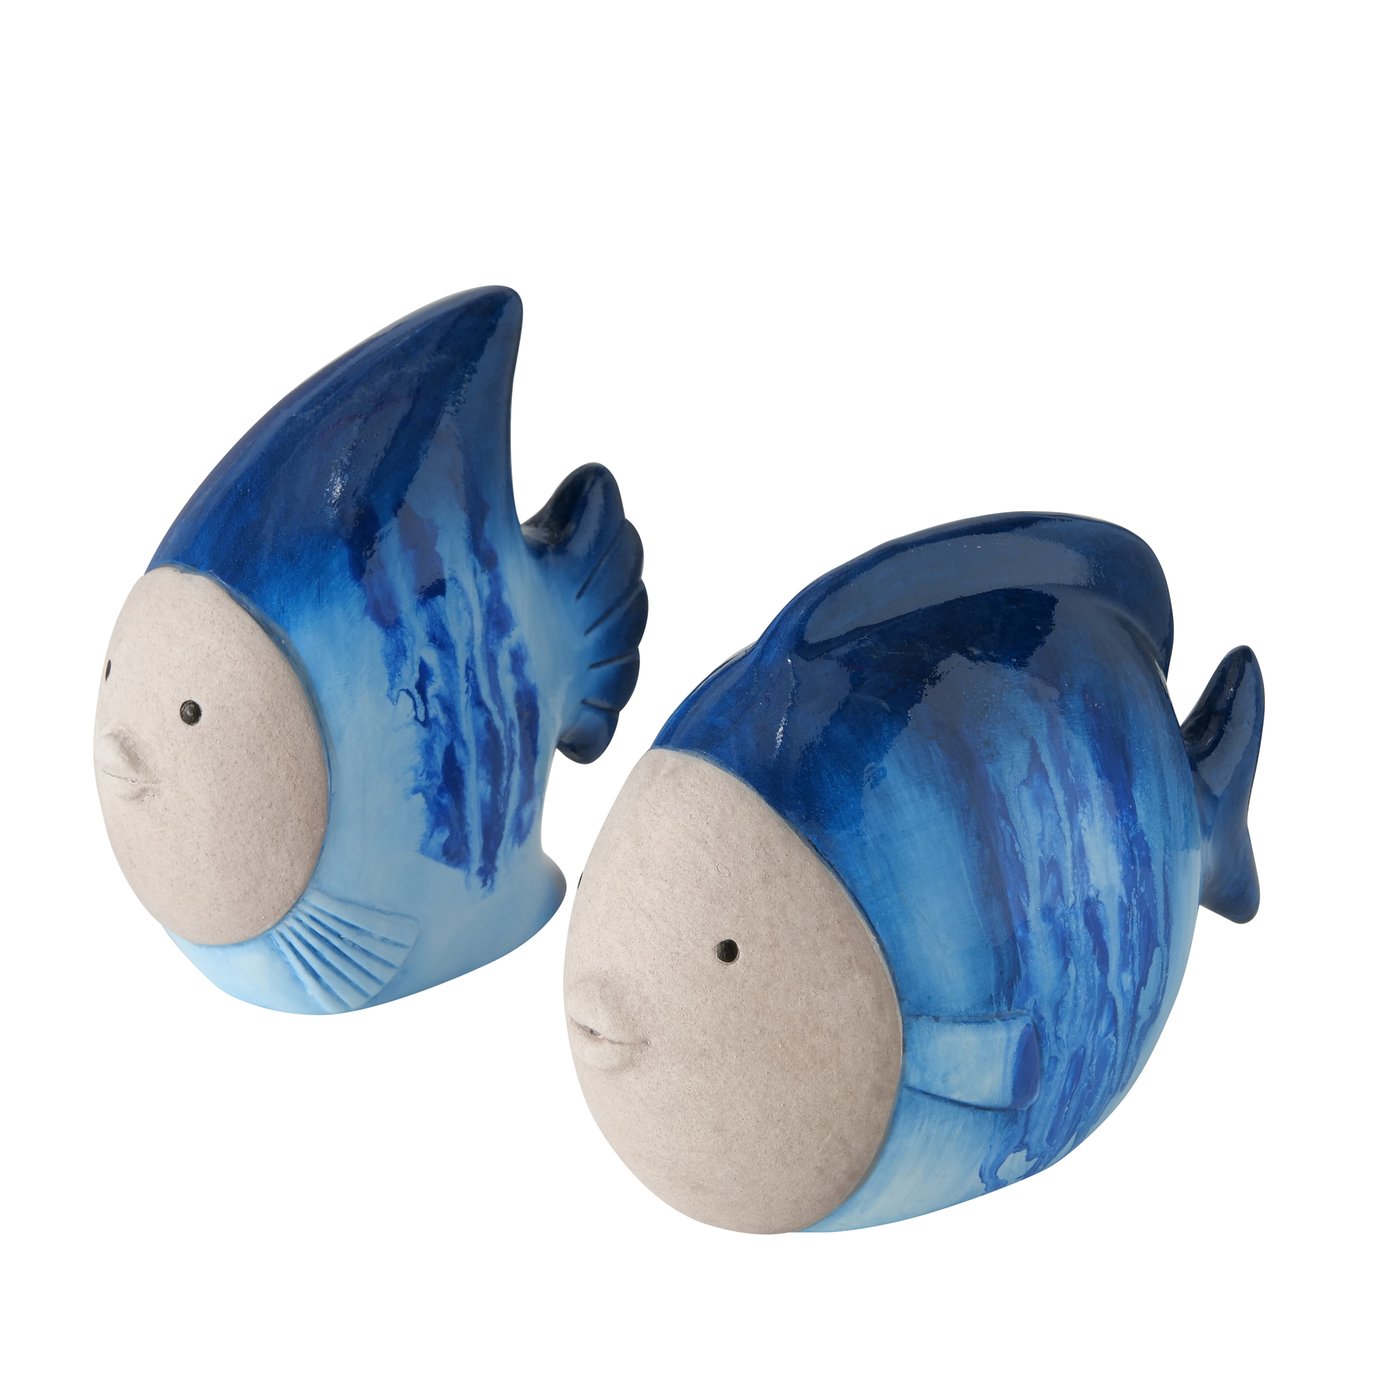 &Quirky Zandro Blue Fish Figure : Round or Pointed Fin